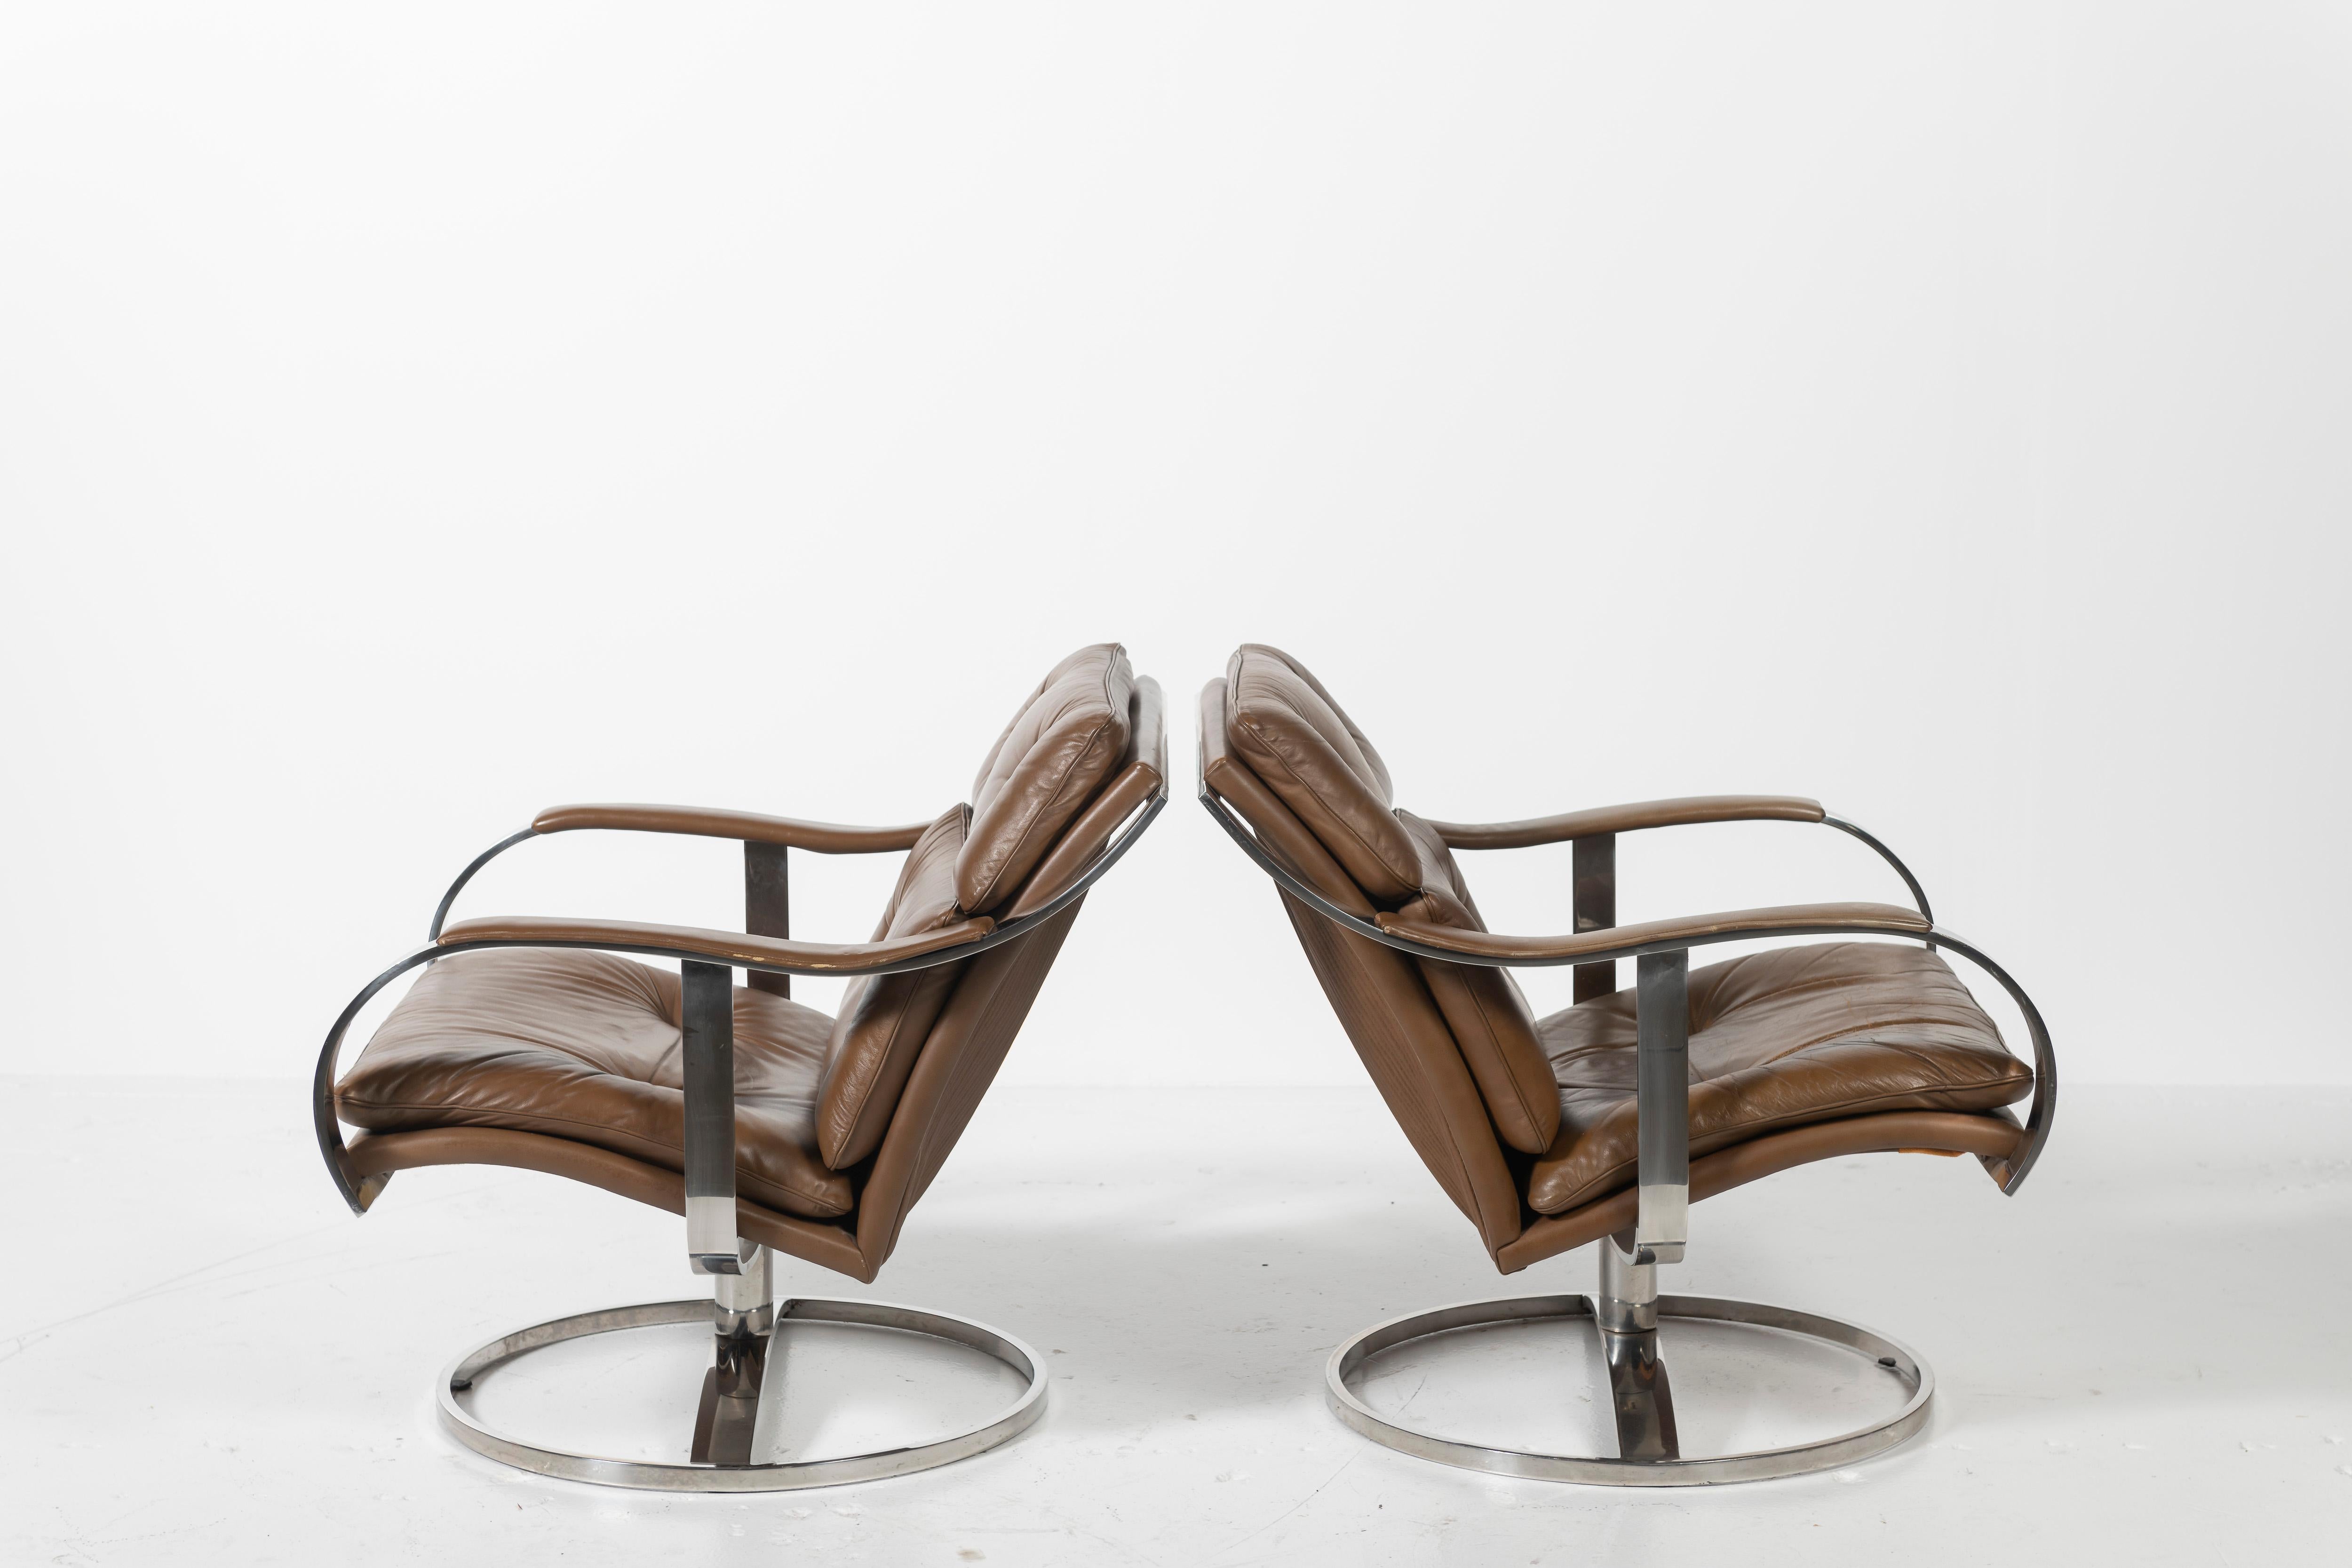 Pair of Mid-Century Modern Gardner Leaver Lounge Chairs with Steelcase Frame 1